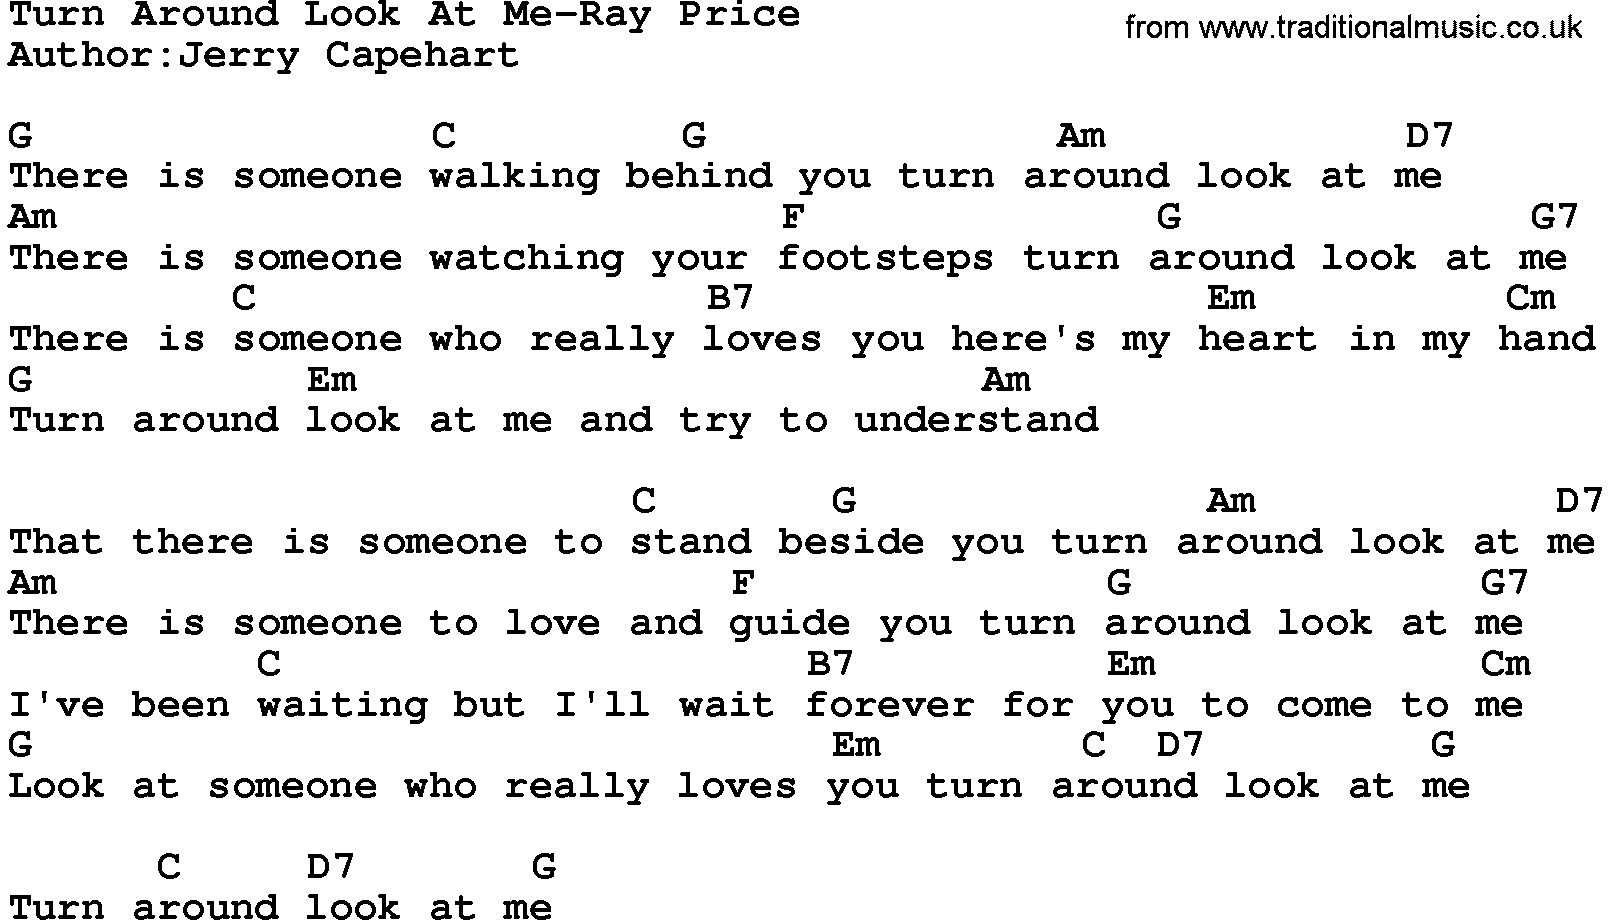 Country music song: Turn Around Look At Me-Ray Price lyrics and chords